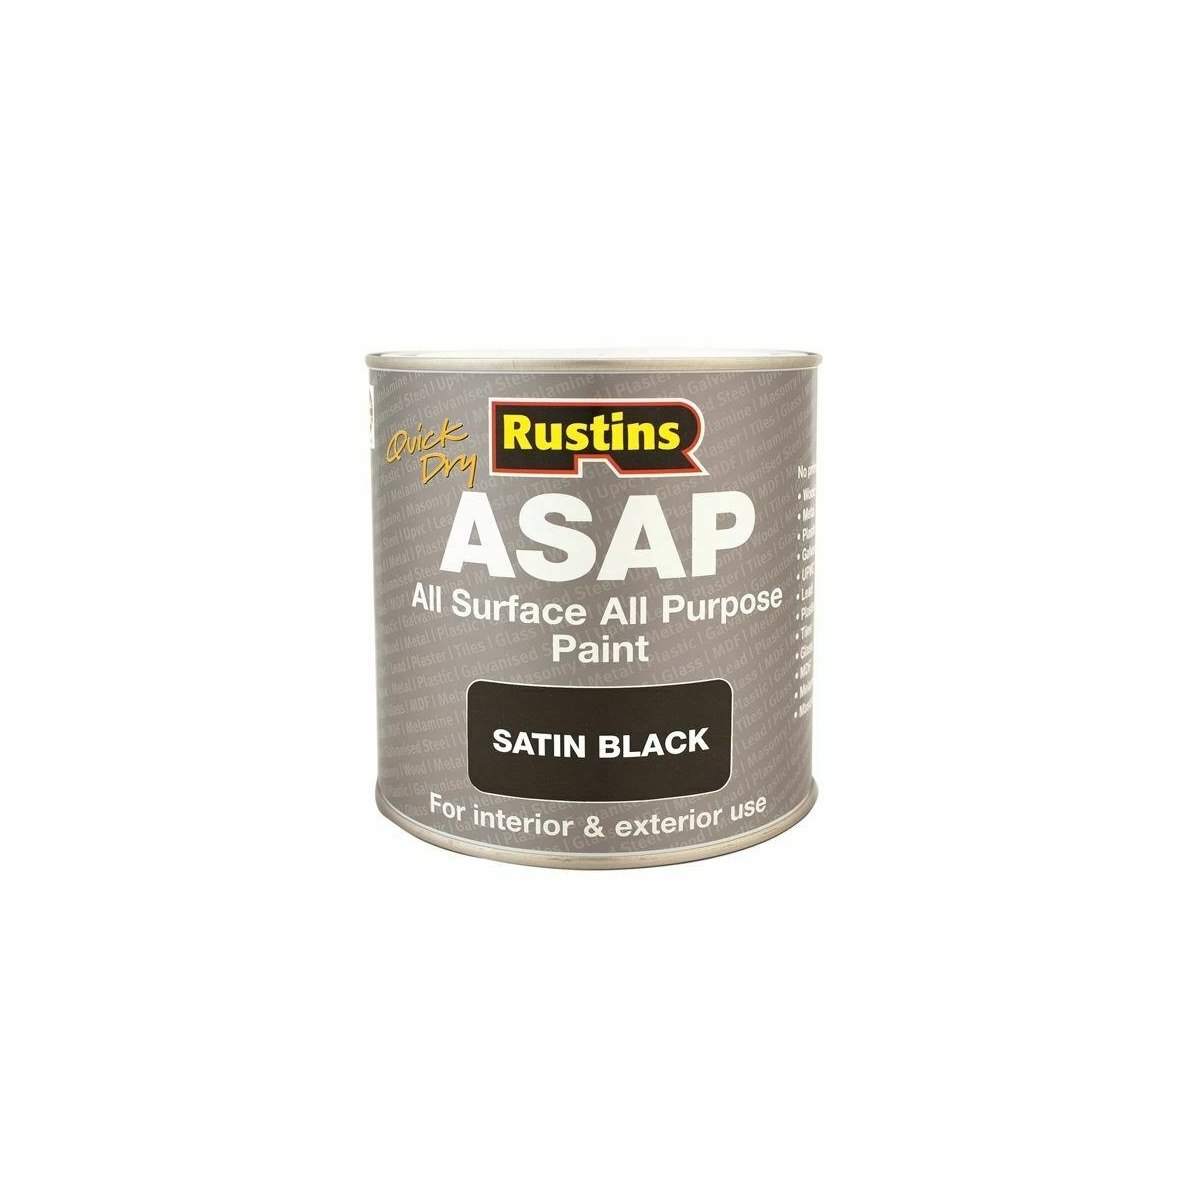 Rustins Quick Dry All Surface All Purpose Paint (ASAP) Black 1 Litre